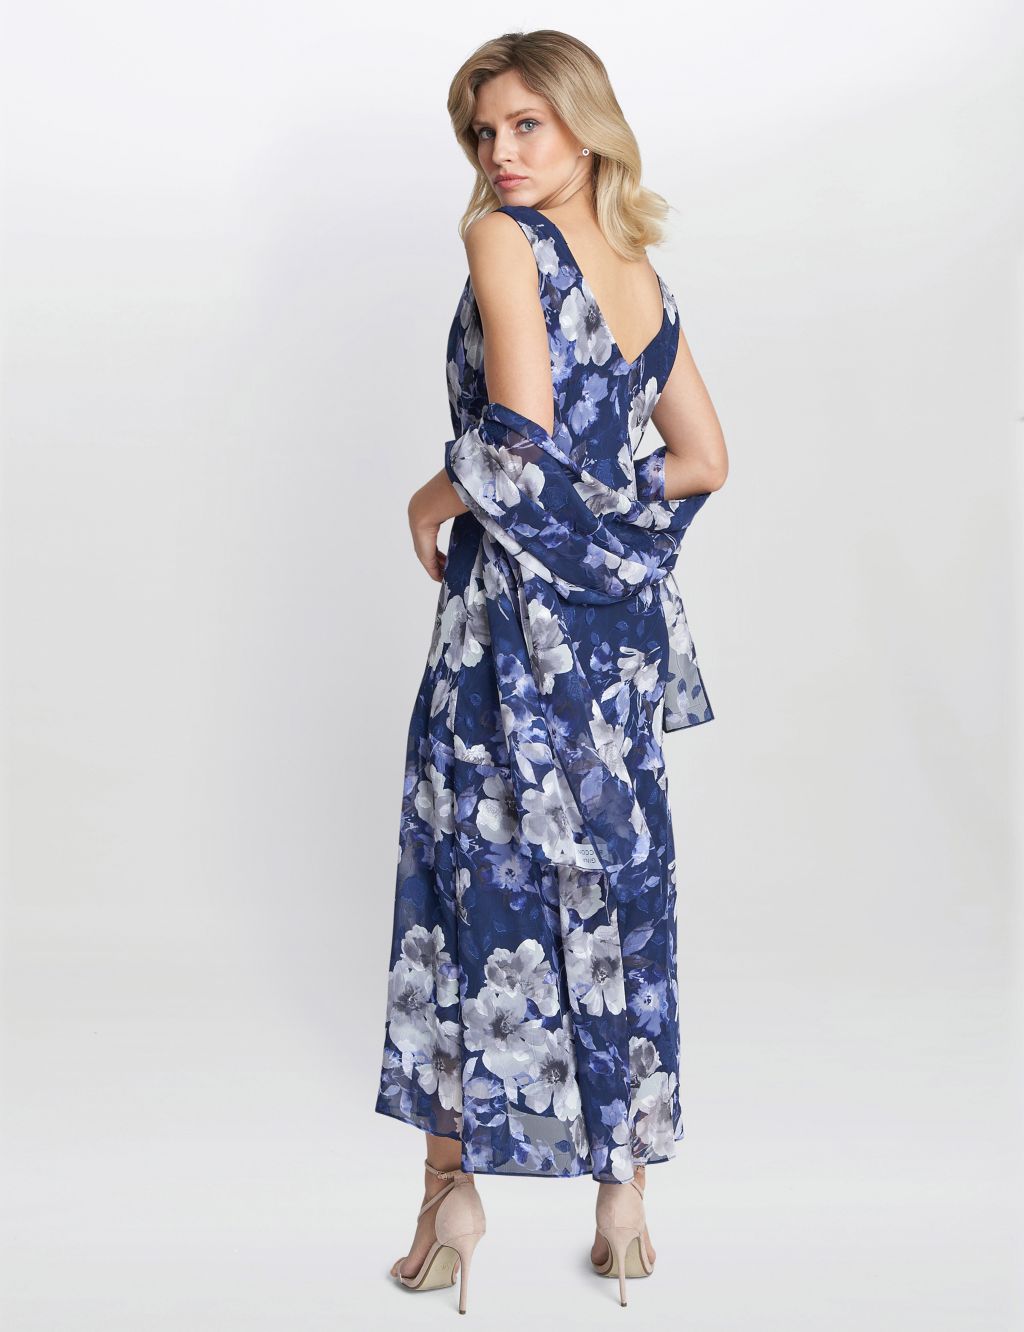 Floral Cowl Neck Maxi Swing Dress with Shawl image 3